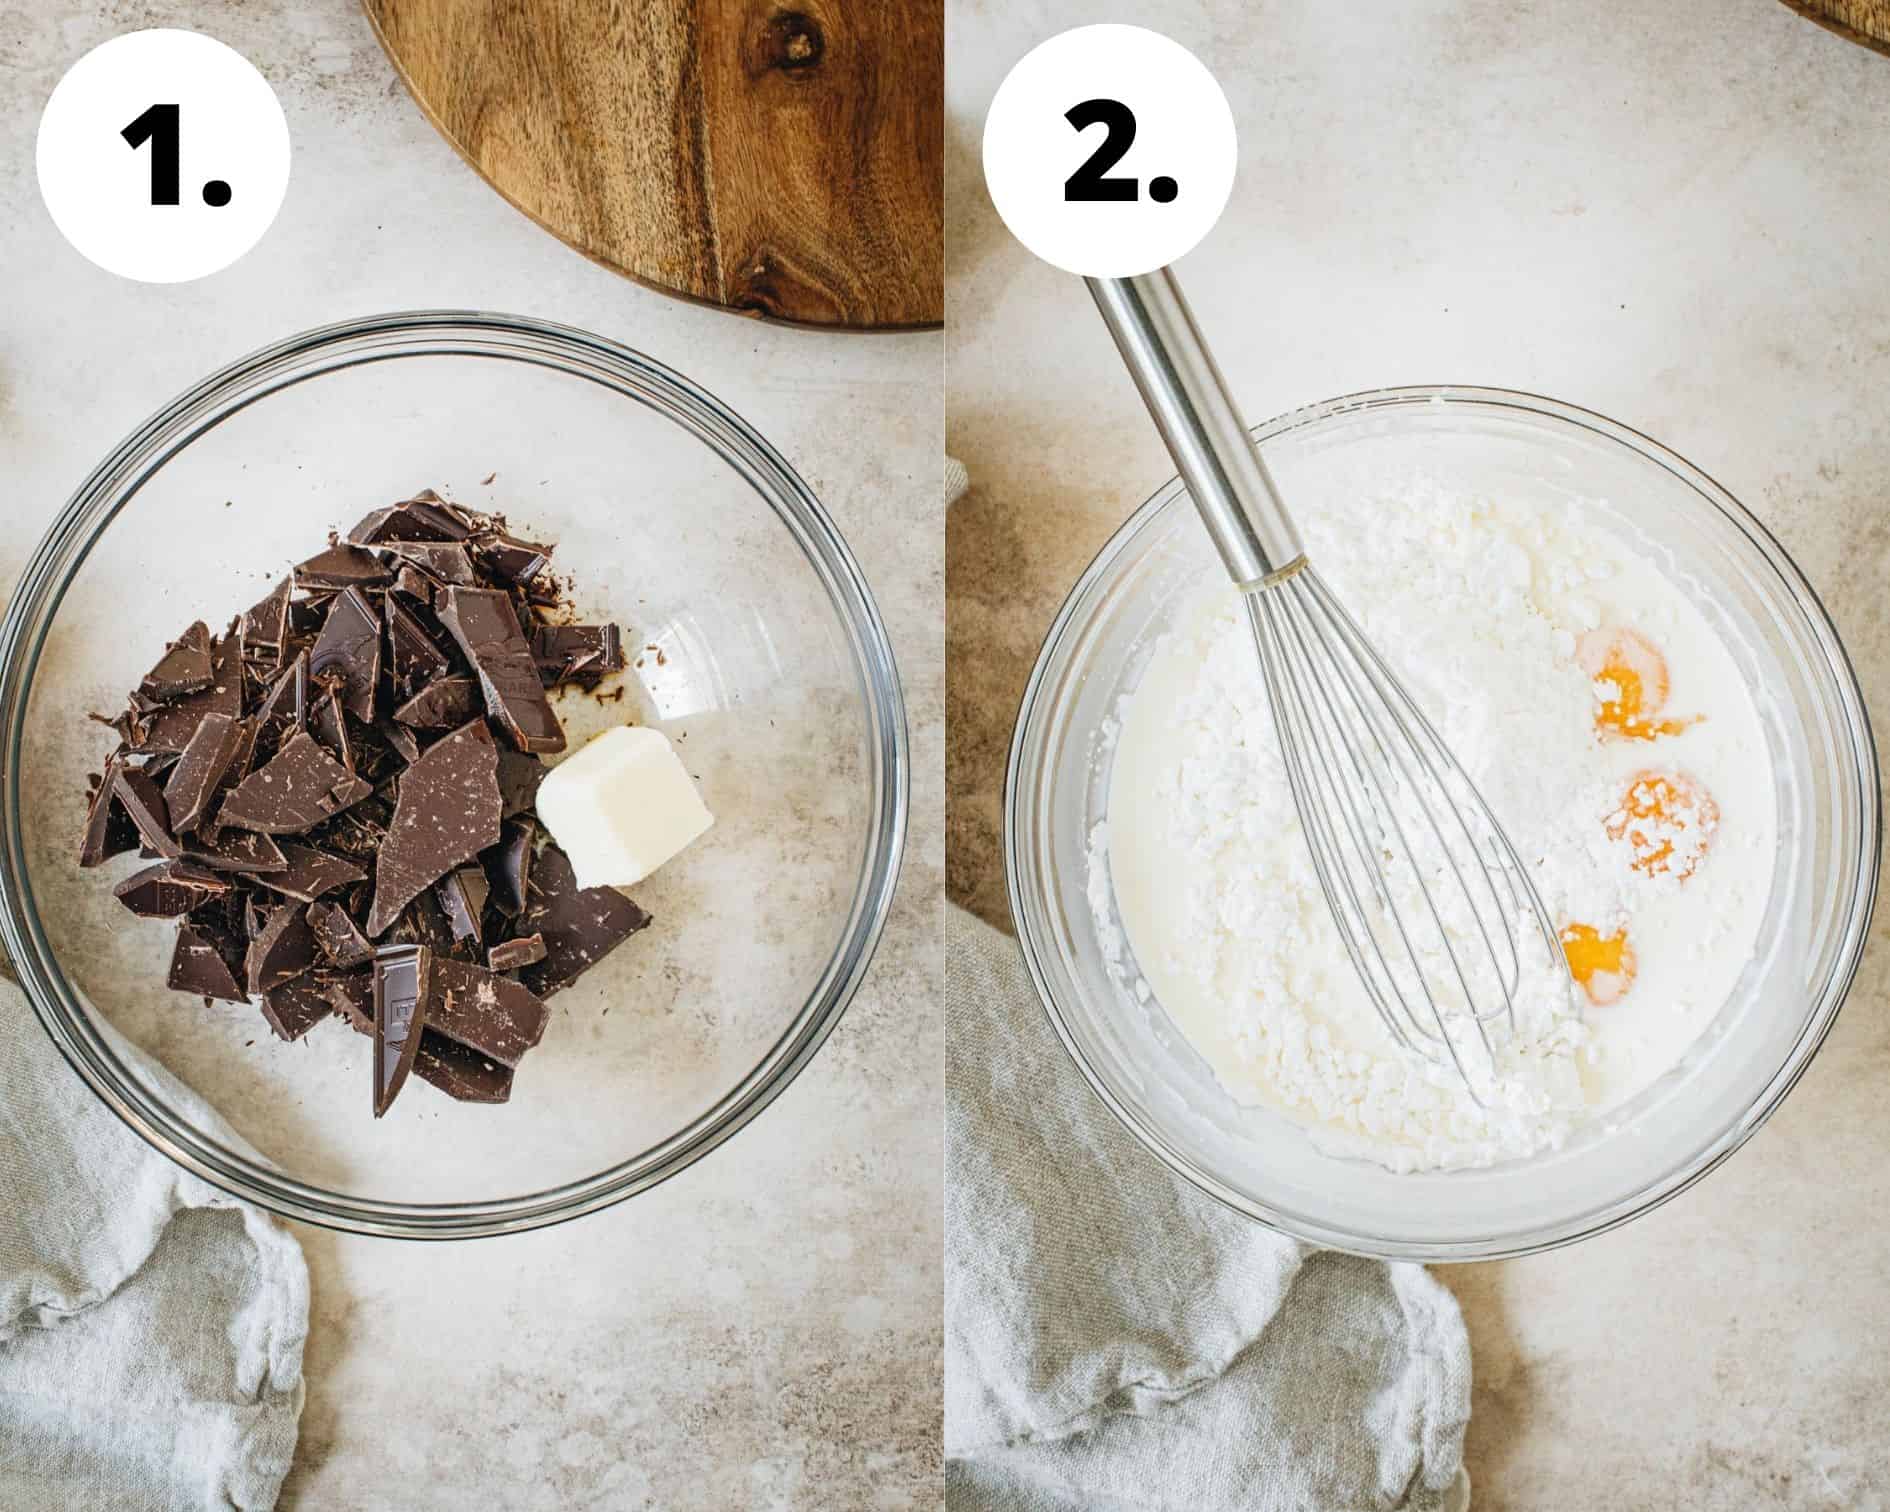 S'mores pie process steps 1 and 2.